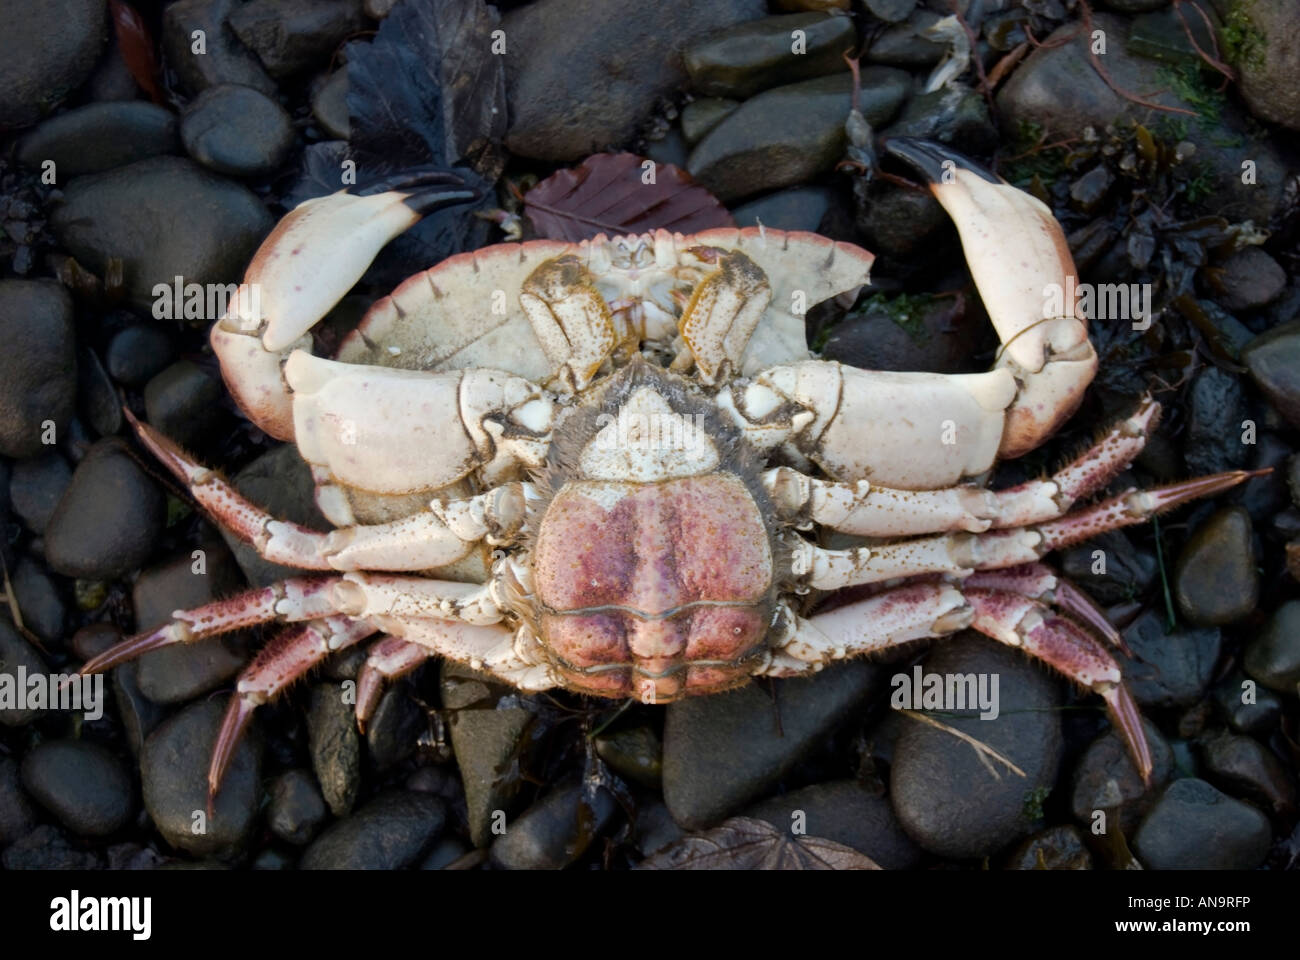 Dead crab on its back Stock Photo